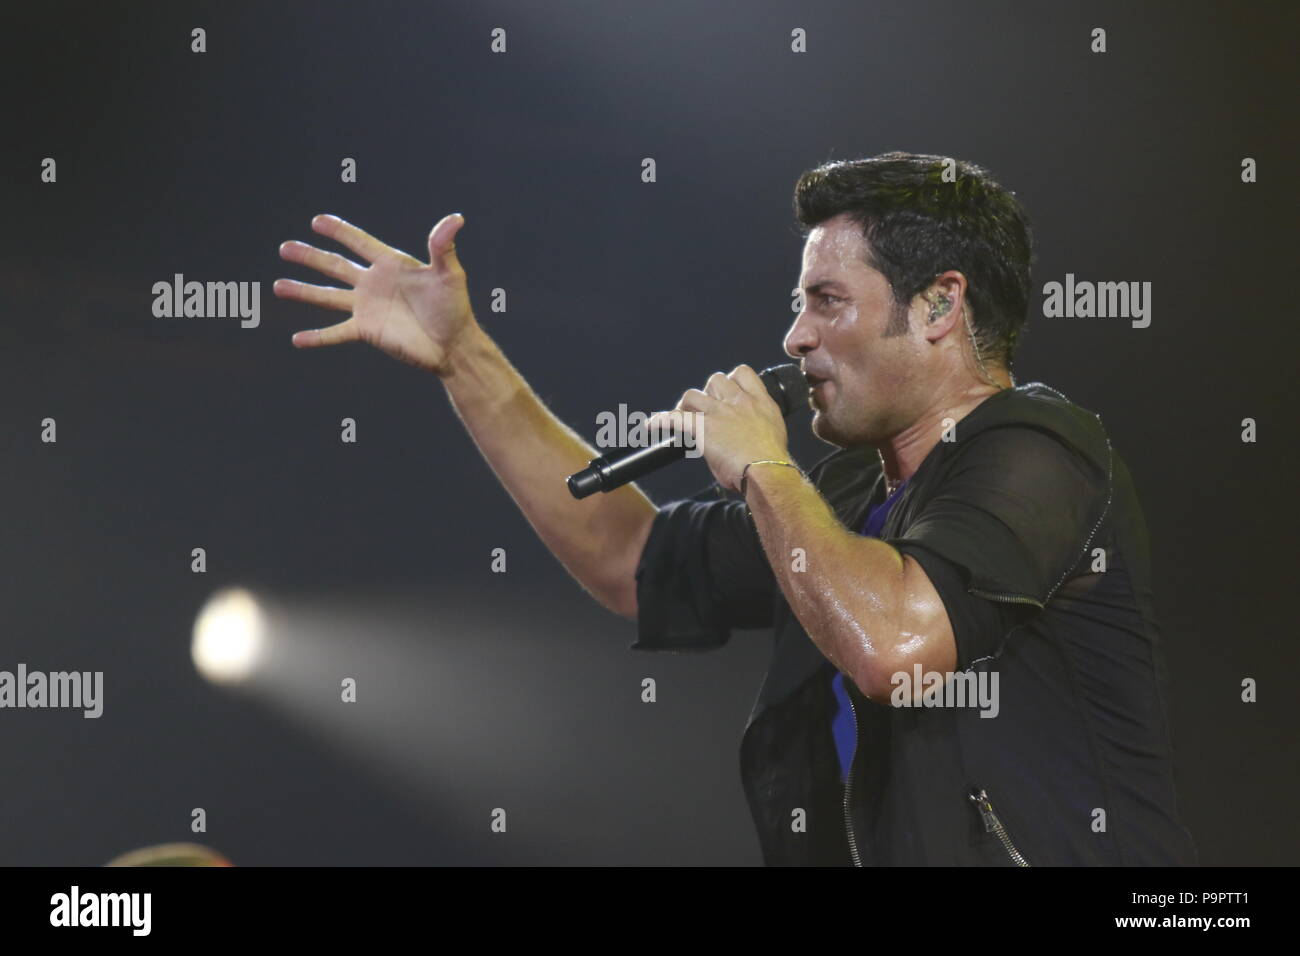 The dancer, singer and Puerto Rican actor Chayanne, during the night of his concert at The AXIS at Planet Hollywood in Las Vegas Nevada on 13 Sep 2015 Stock Photo